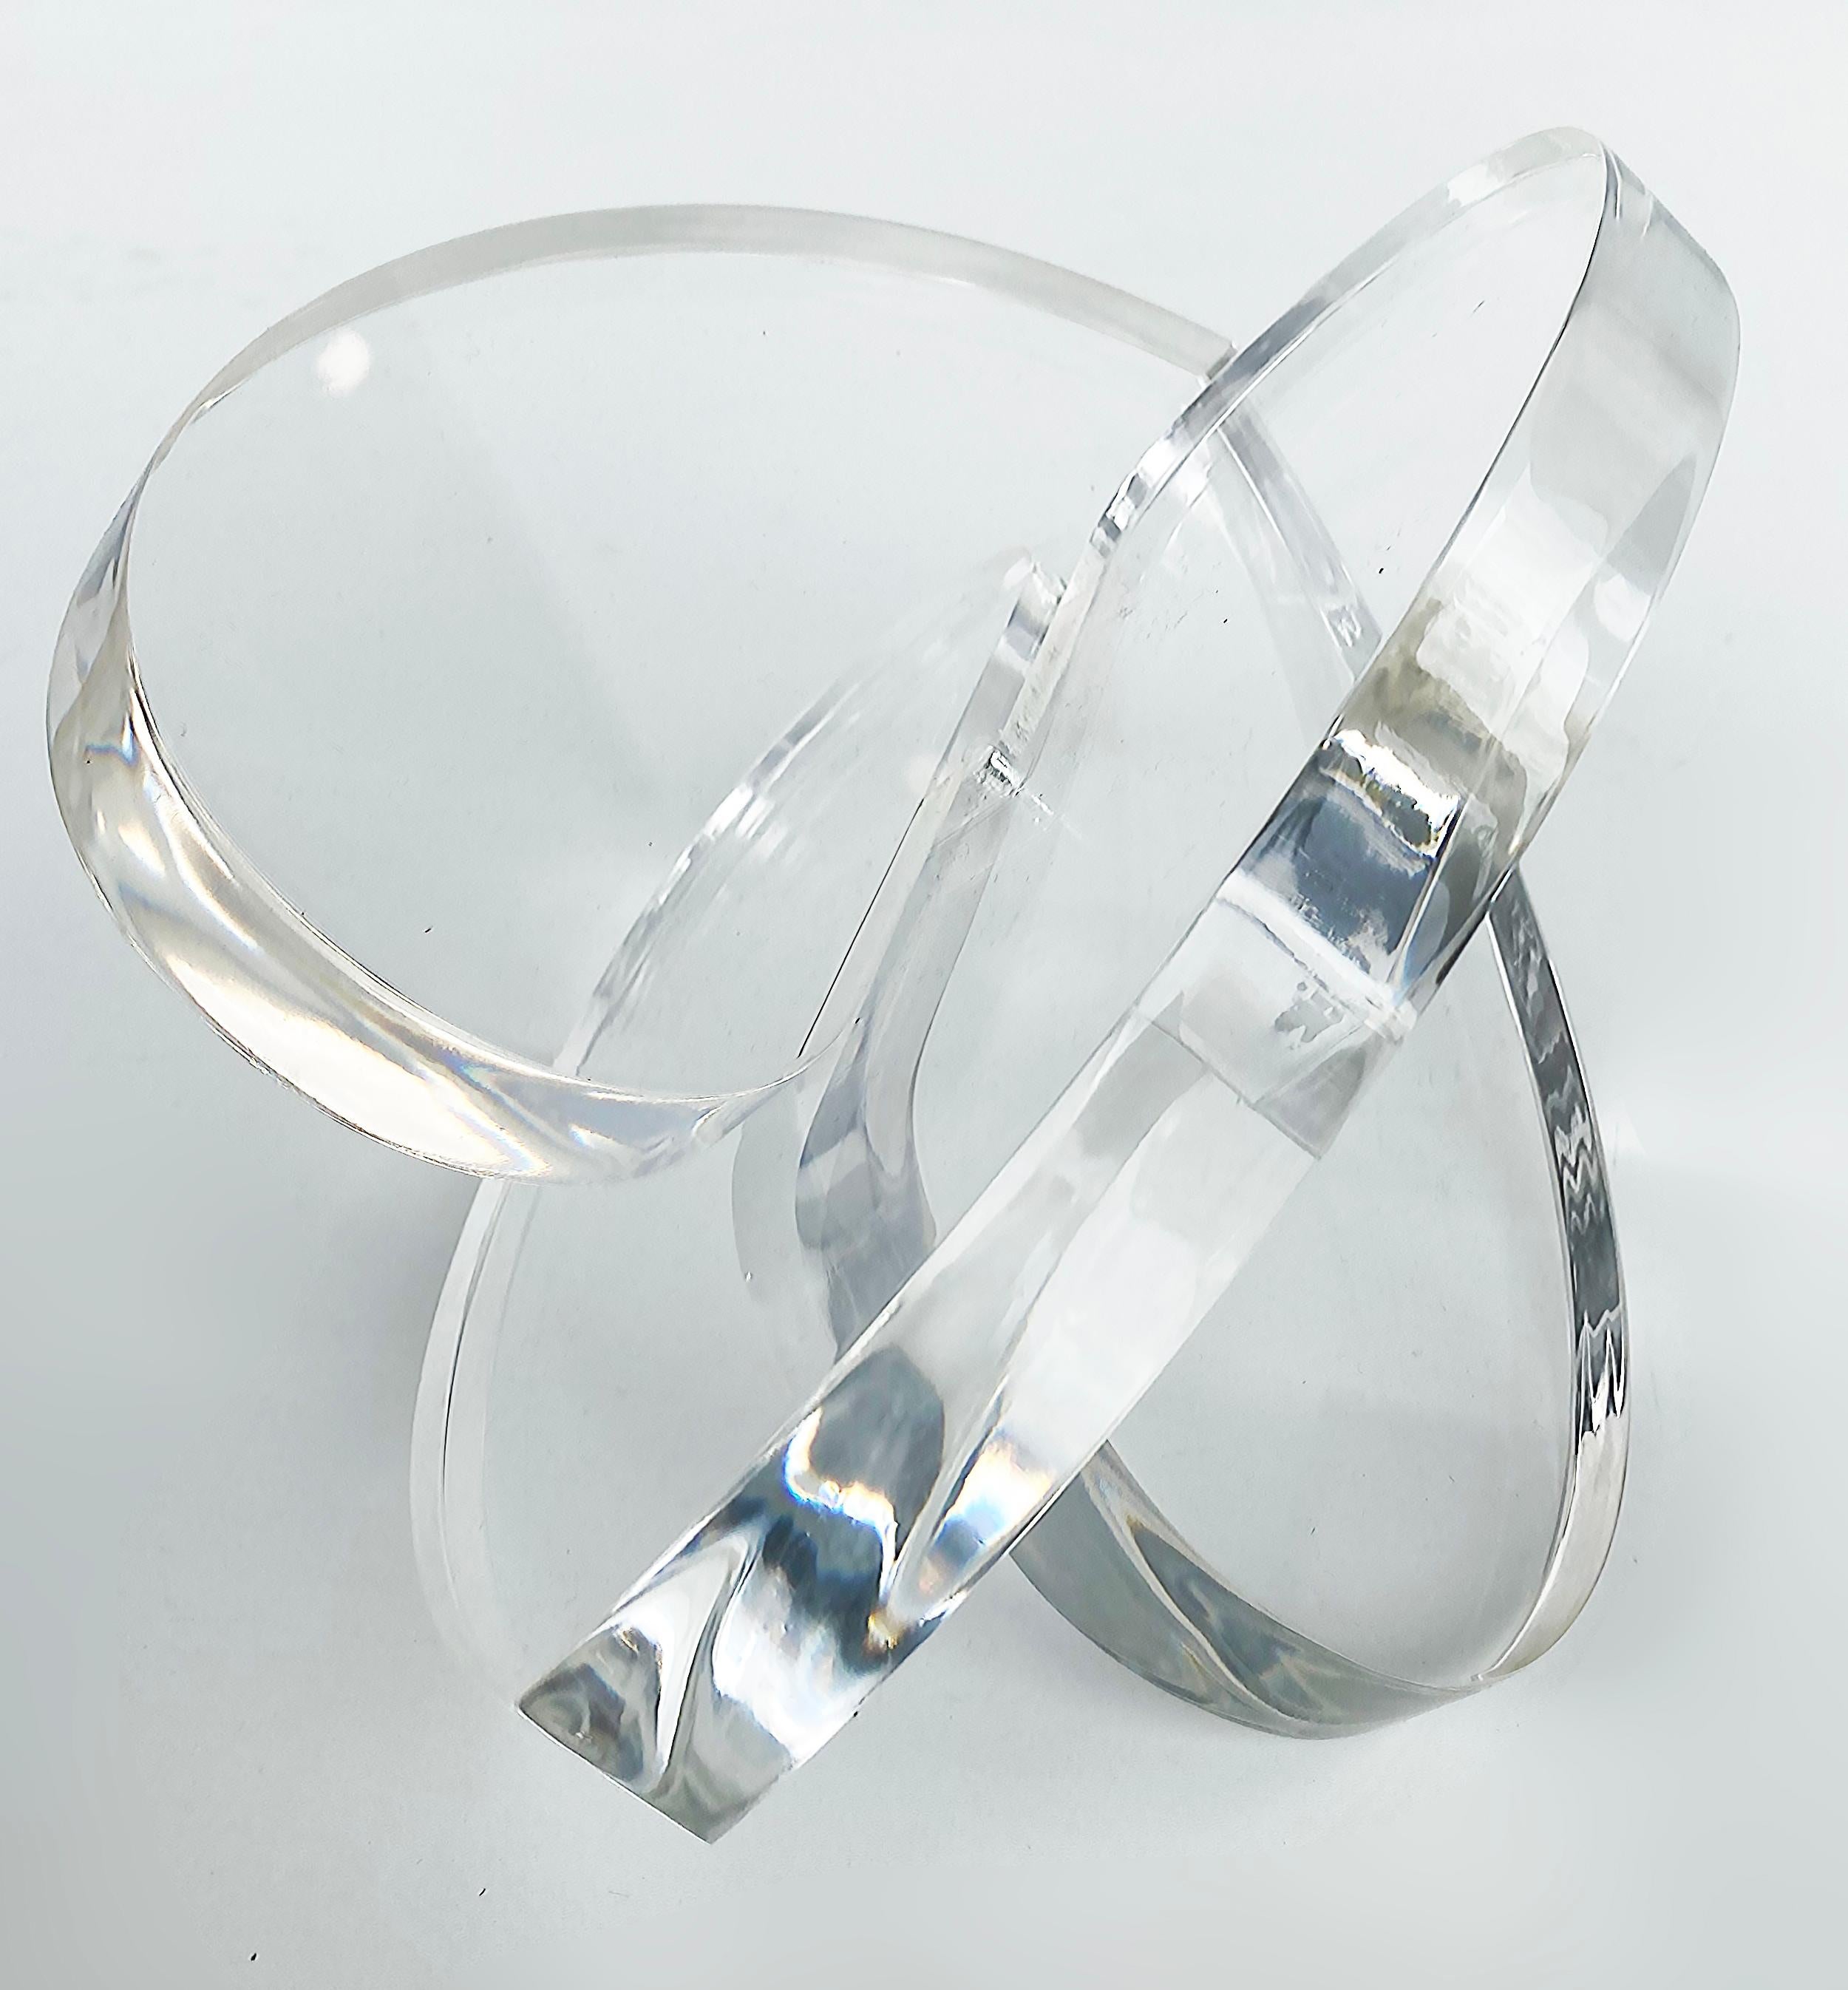 Thick Clear Lucite Interlocking Hearts Sculpture by Miami Artist Michael Gitter

Offered for sale is a thick clear lucite interlocking hearts sculpture by Miami based artist Michael Gitter.  These hearts are made in many different colors and are